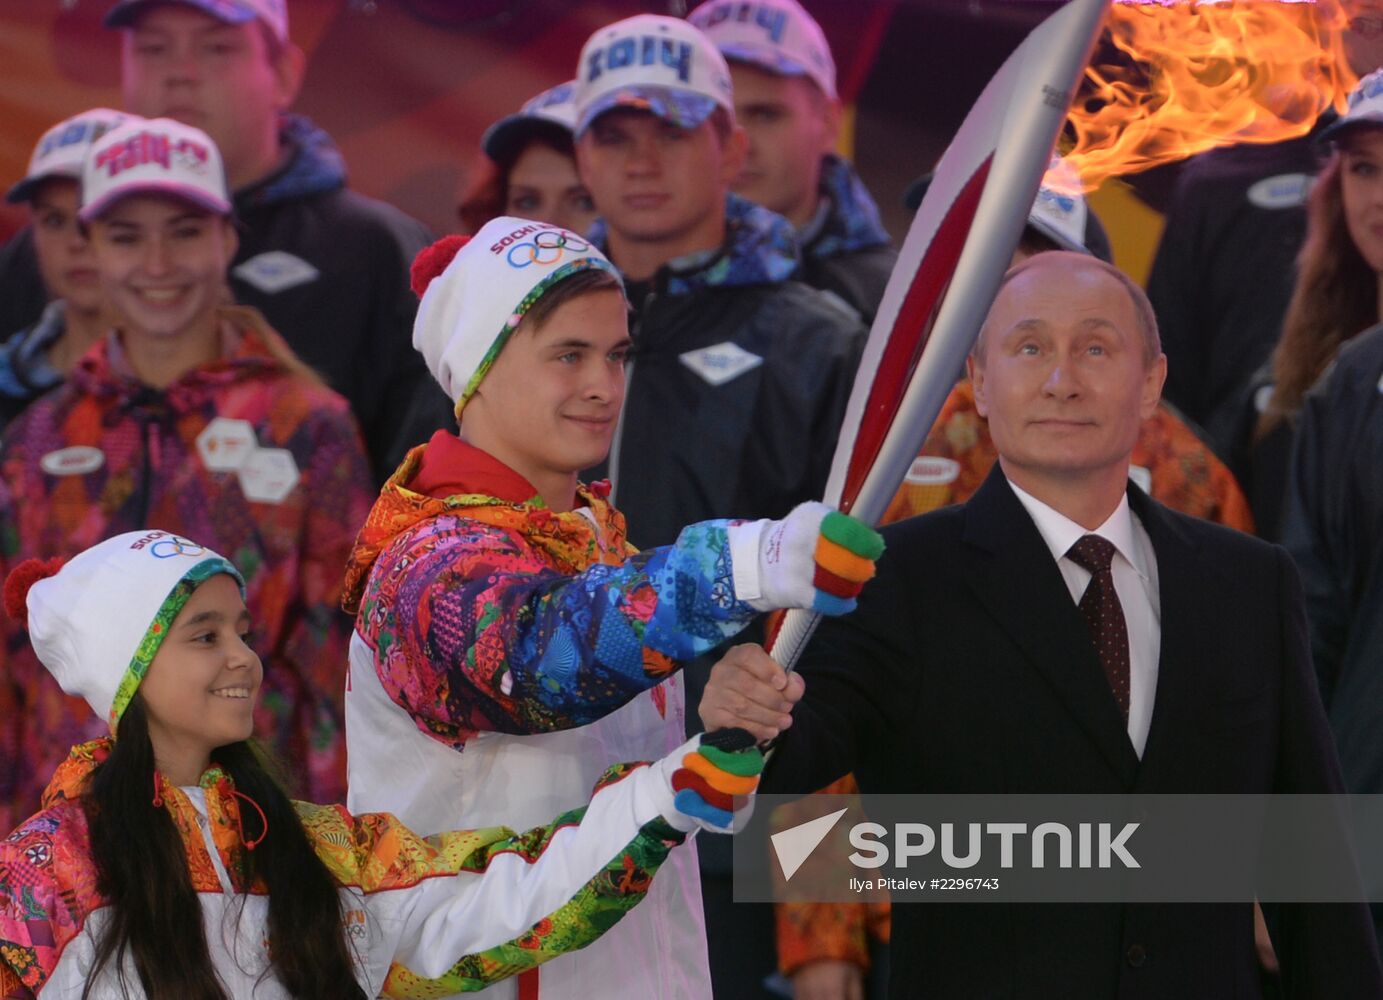 Sochi 2014 Olympic torch relay launching ceremony